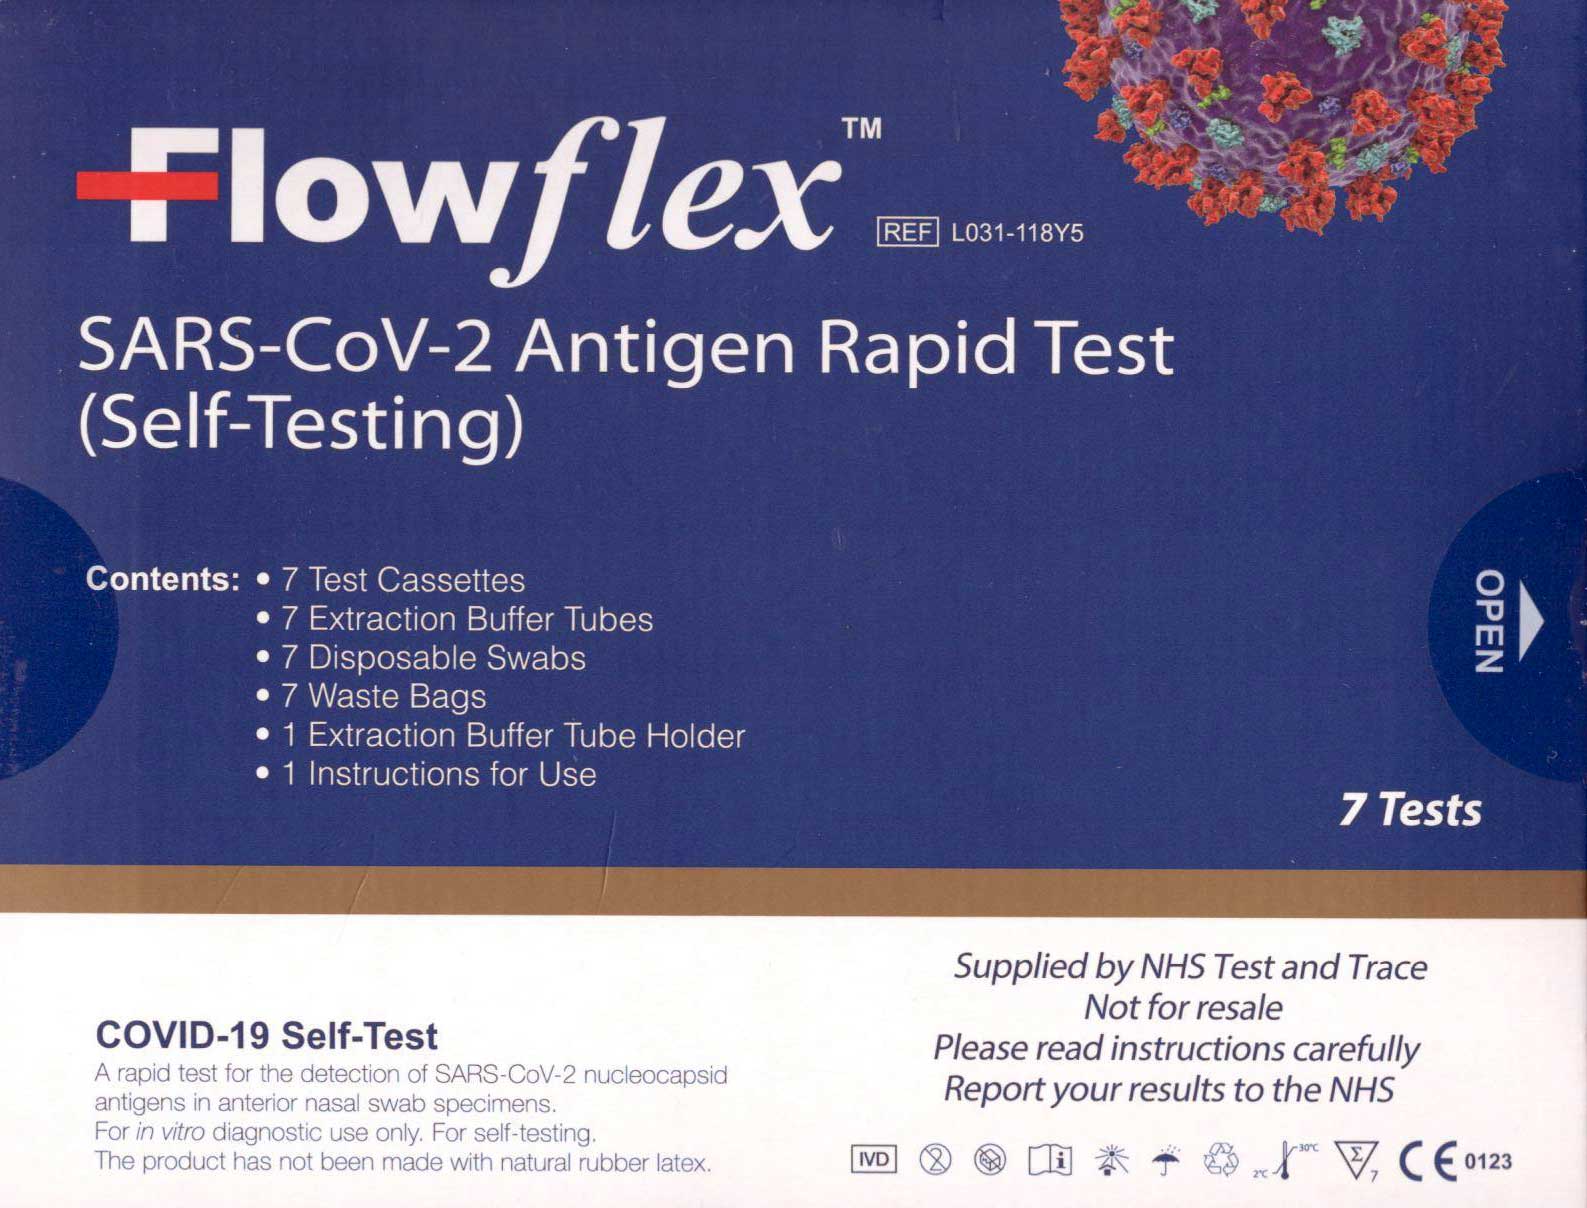 COVID Lateral Flow test kit